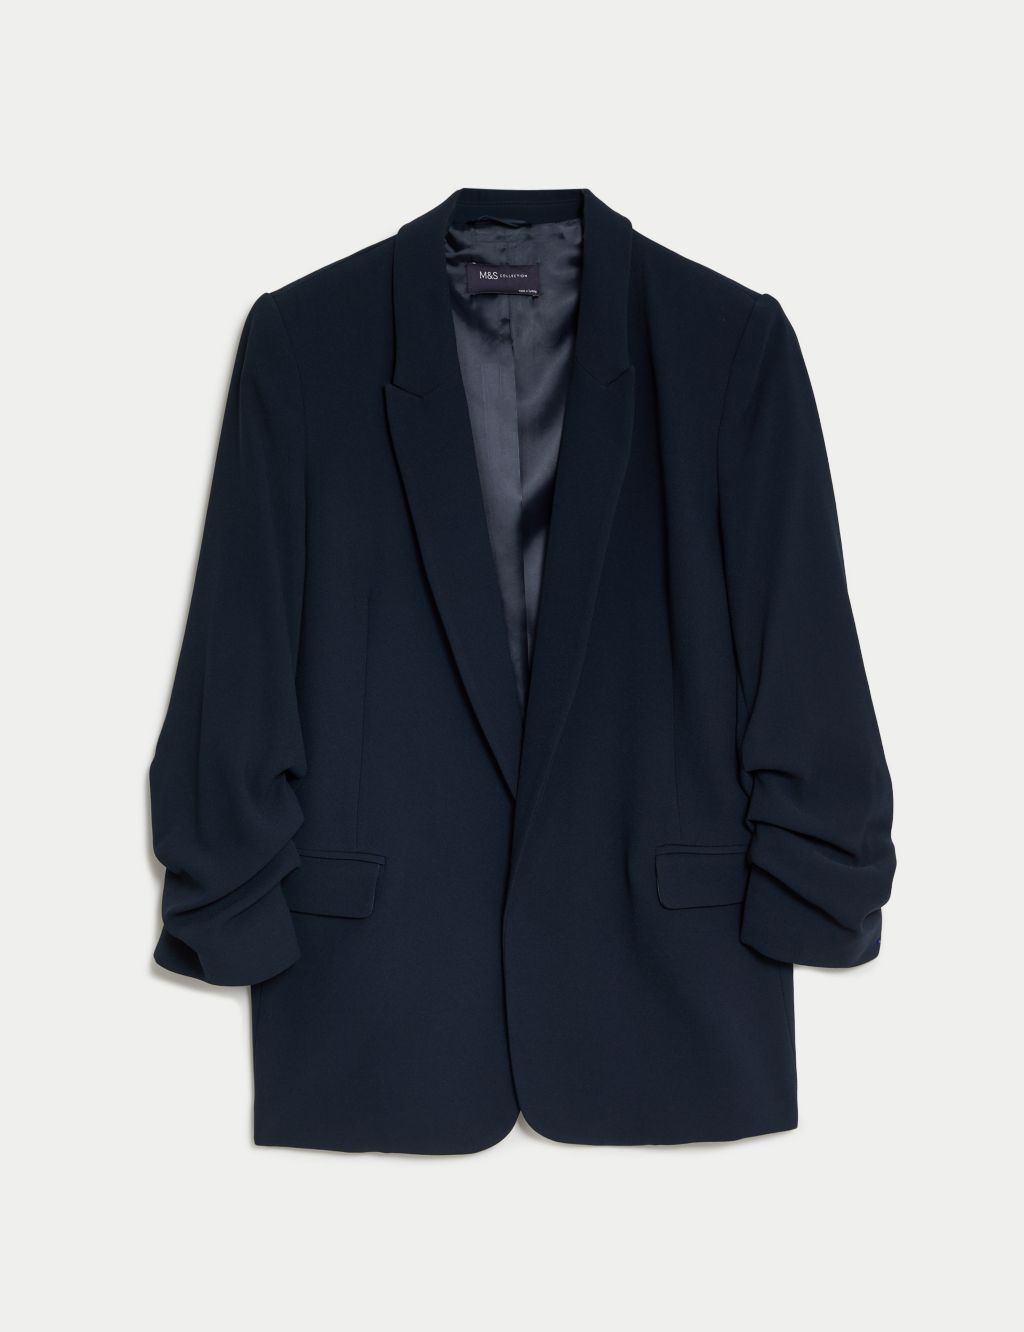 Relaxed Ruched Sleeve Blazer image 2